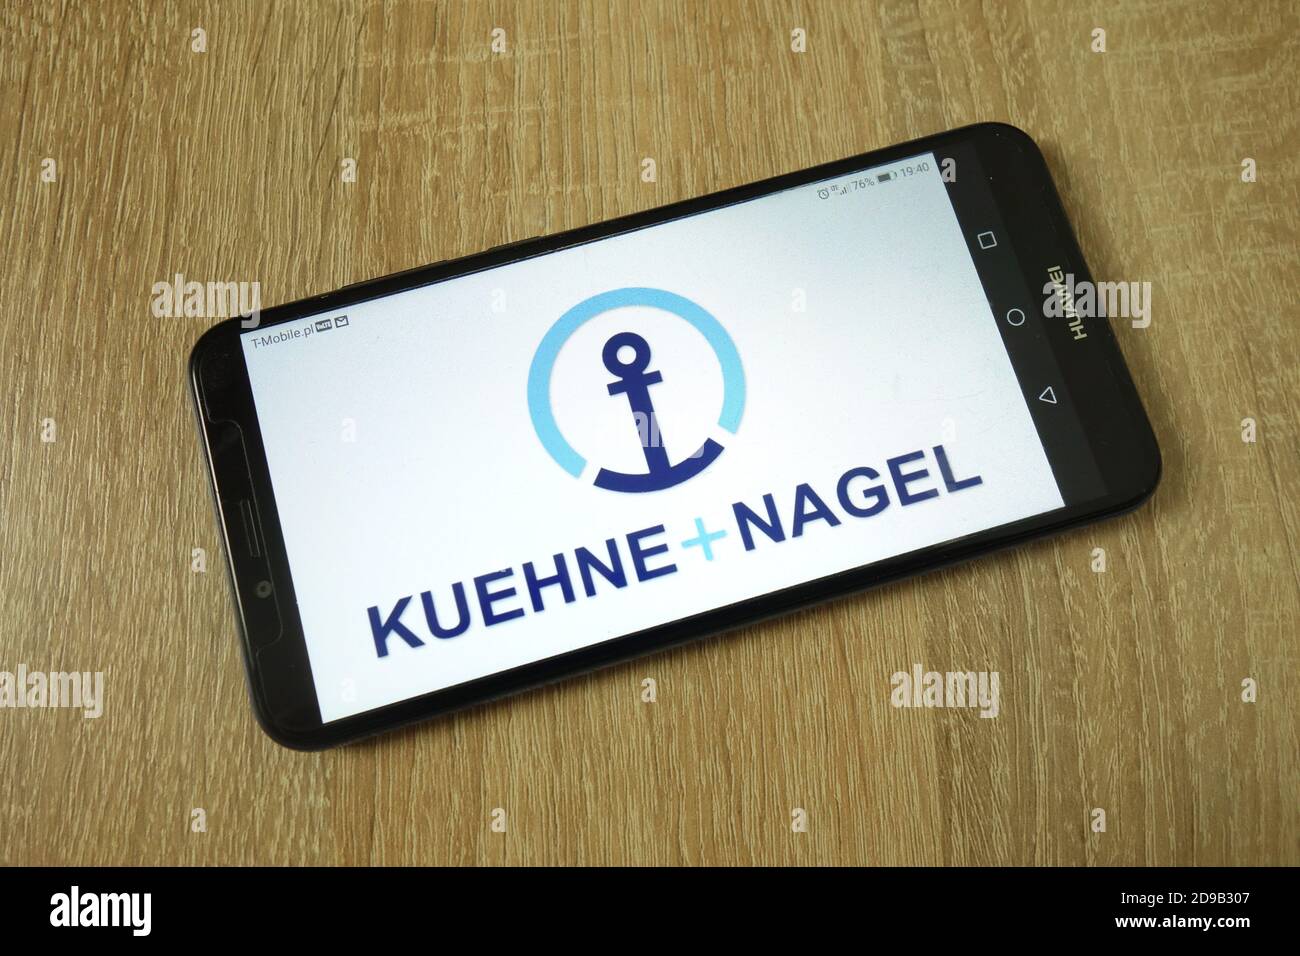 Kuehne Nagel High Resolution Stock Photography and Images - Alamy